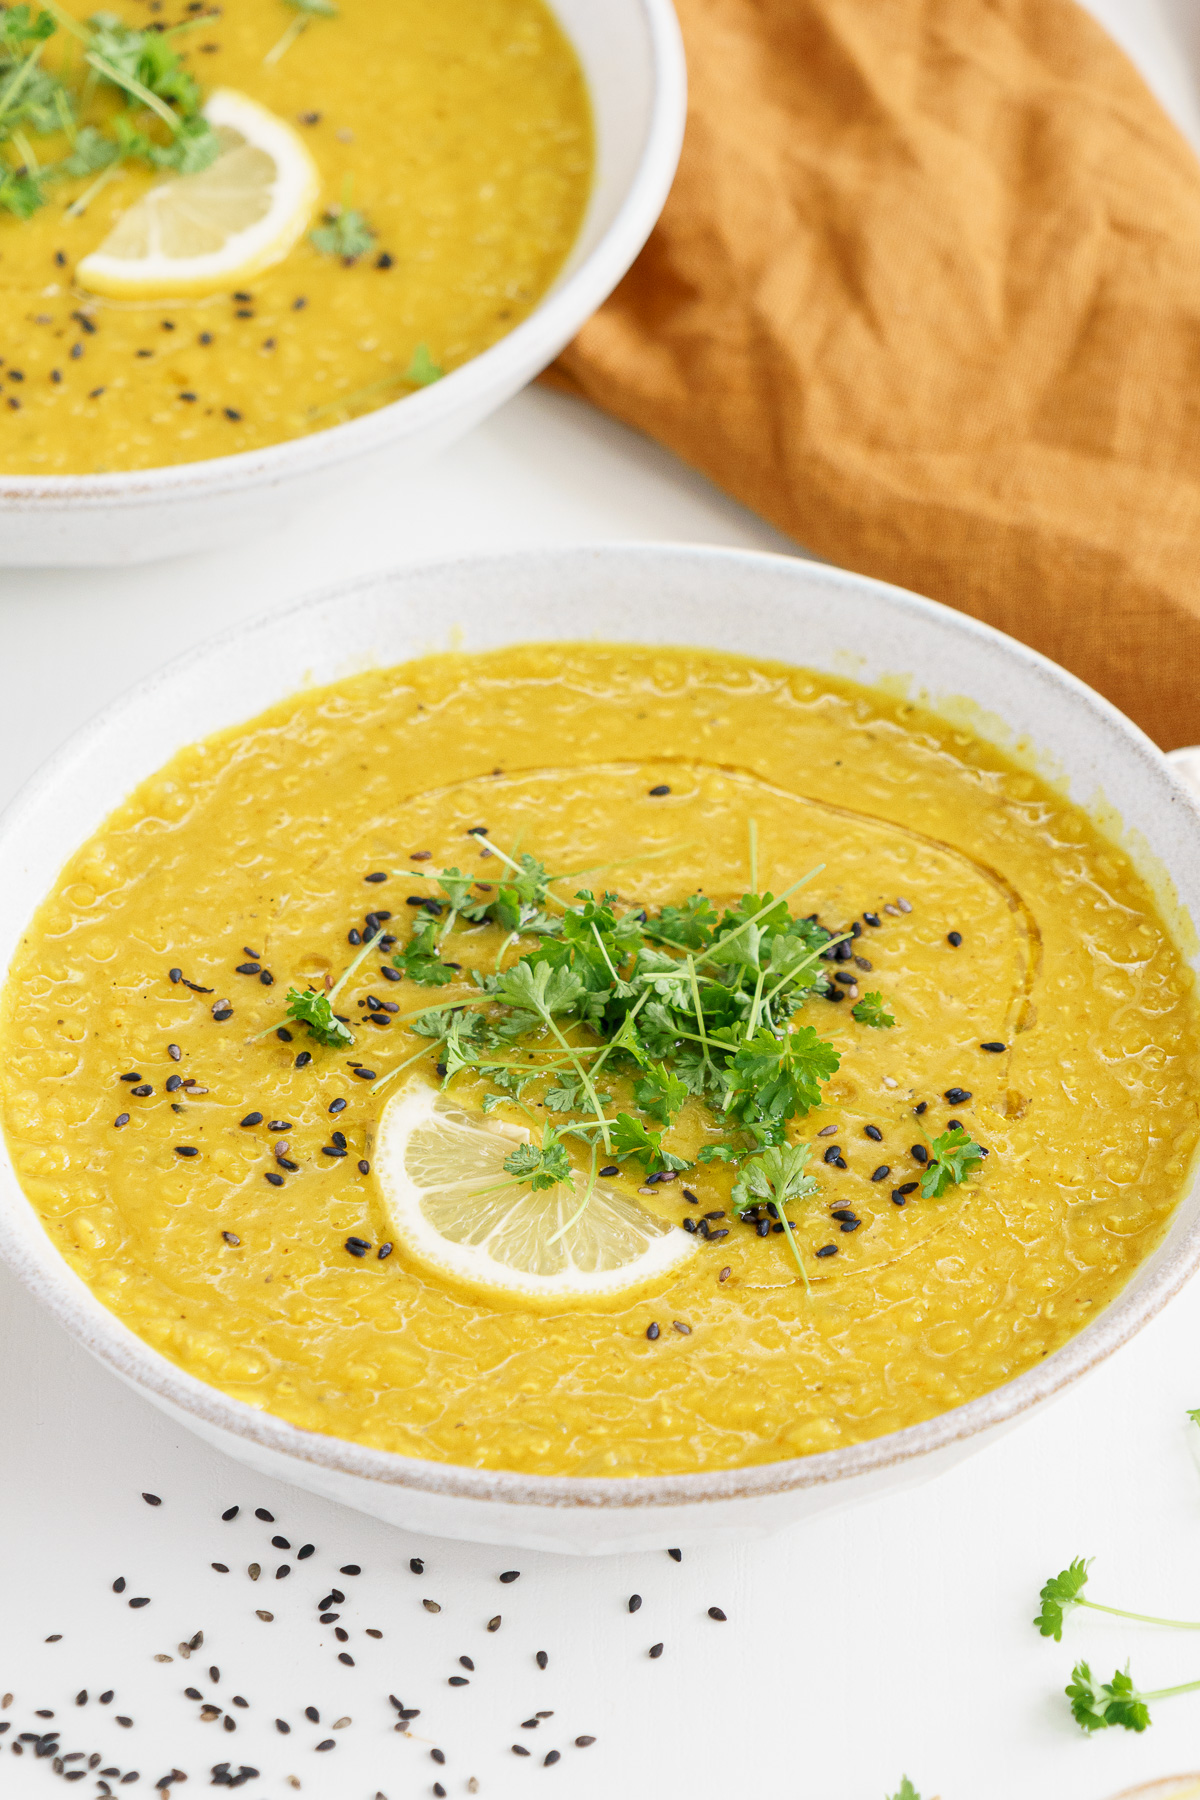 Bowl of middle eastern red lentil soup on the table garnished with slice of lemon and fresh herbs.